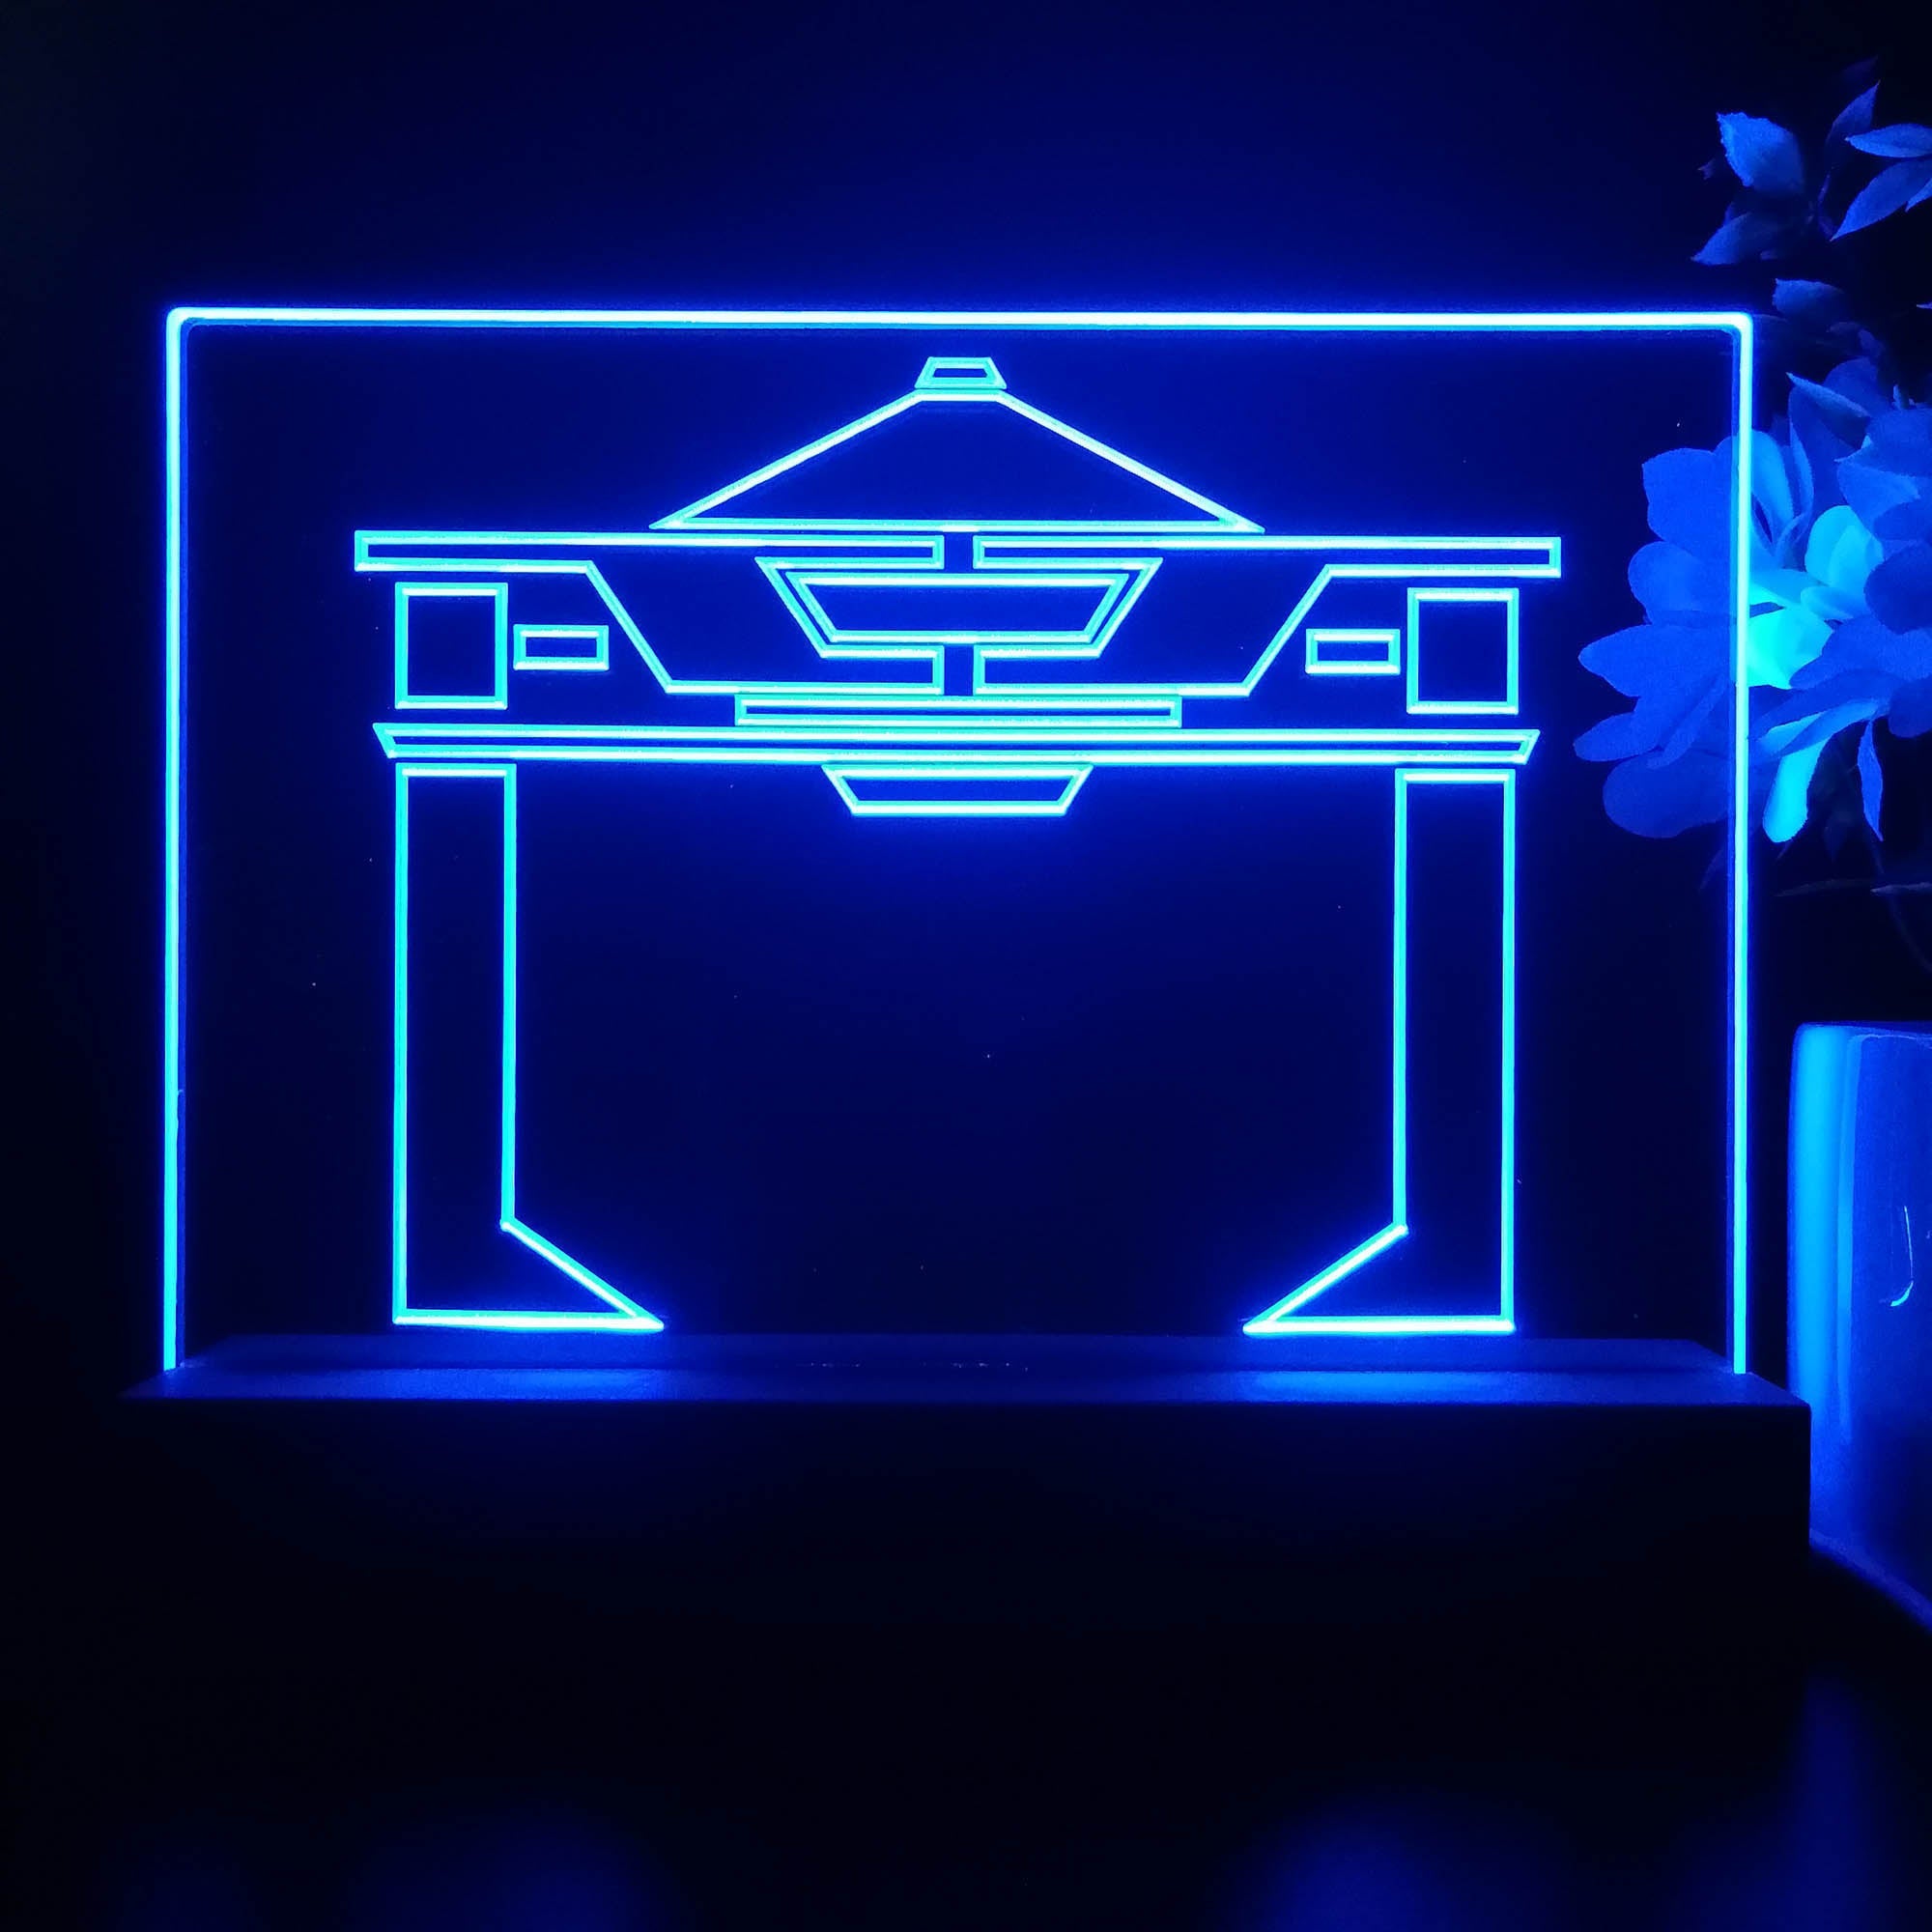 Tron Recognizer Game Room LED Sign Lamp Display